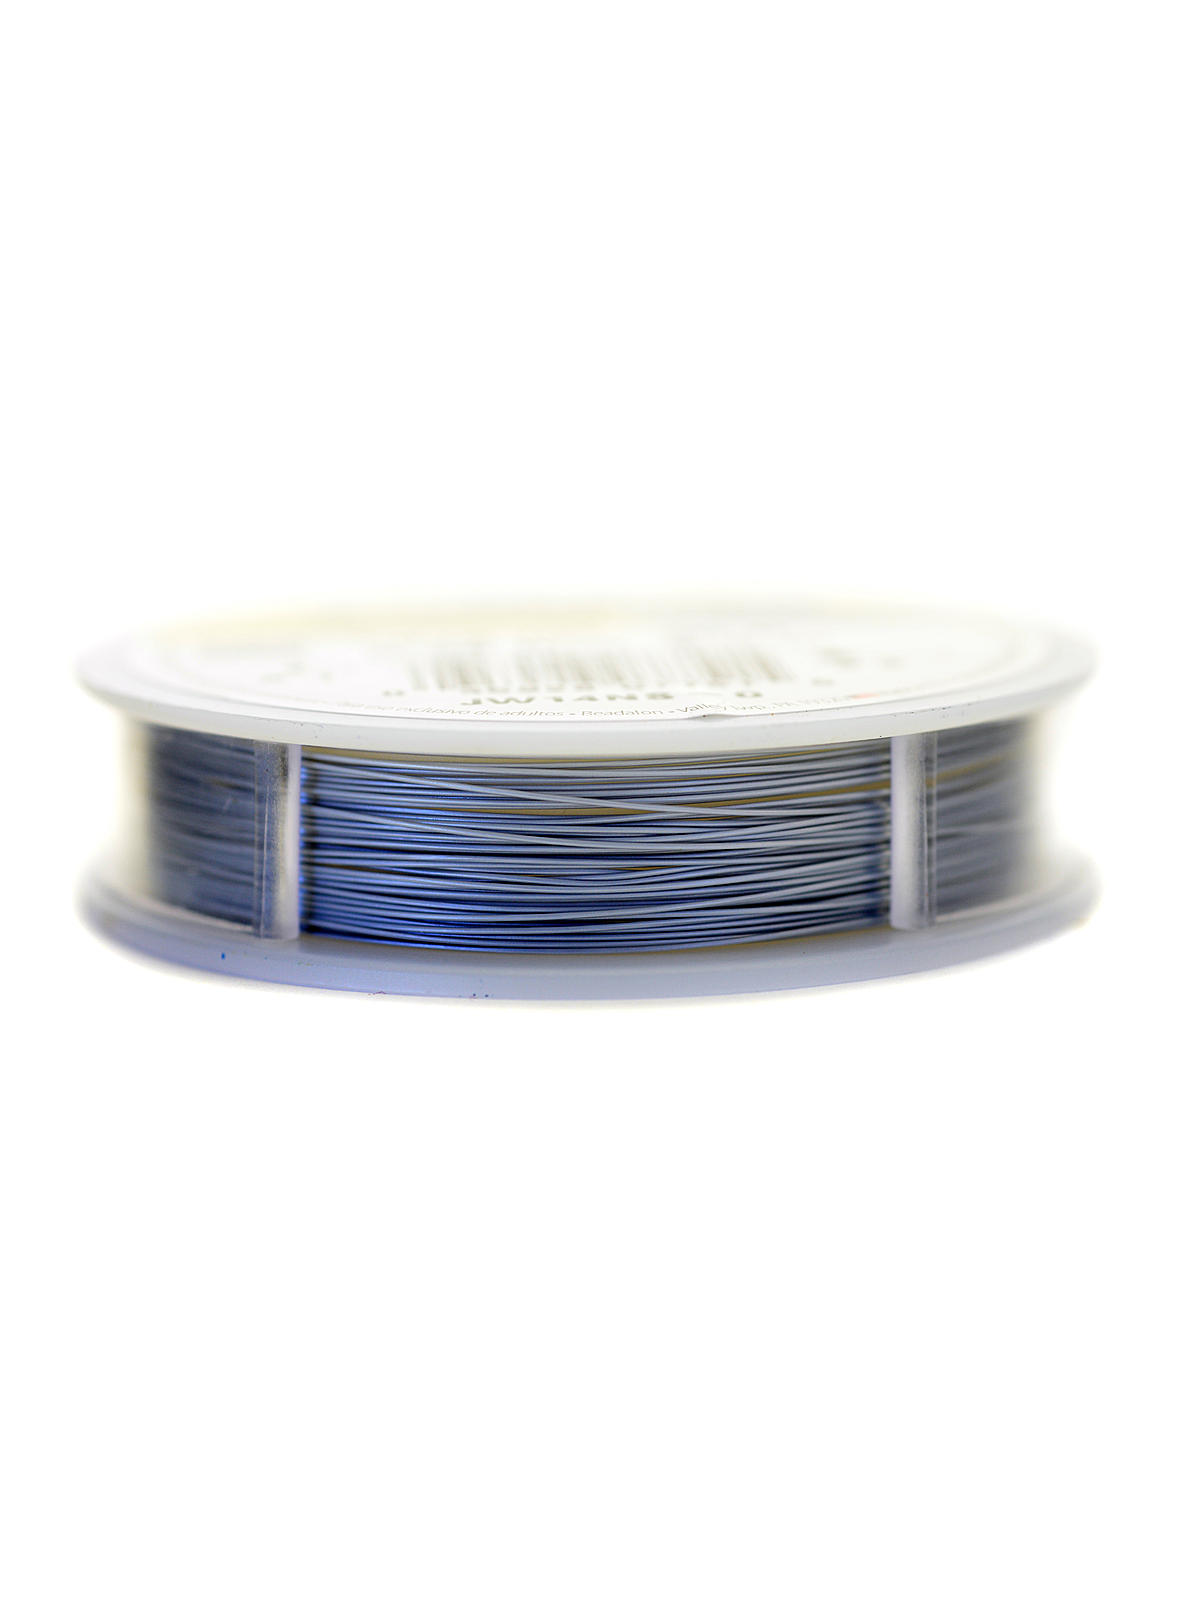 19 Strand Bead Stringing Wire Satin Silver .015 In. (0.38 Mm) 30 Ft. Spool